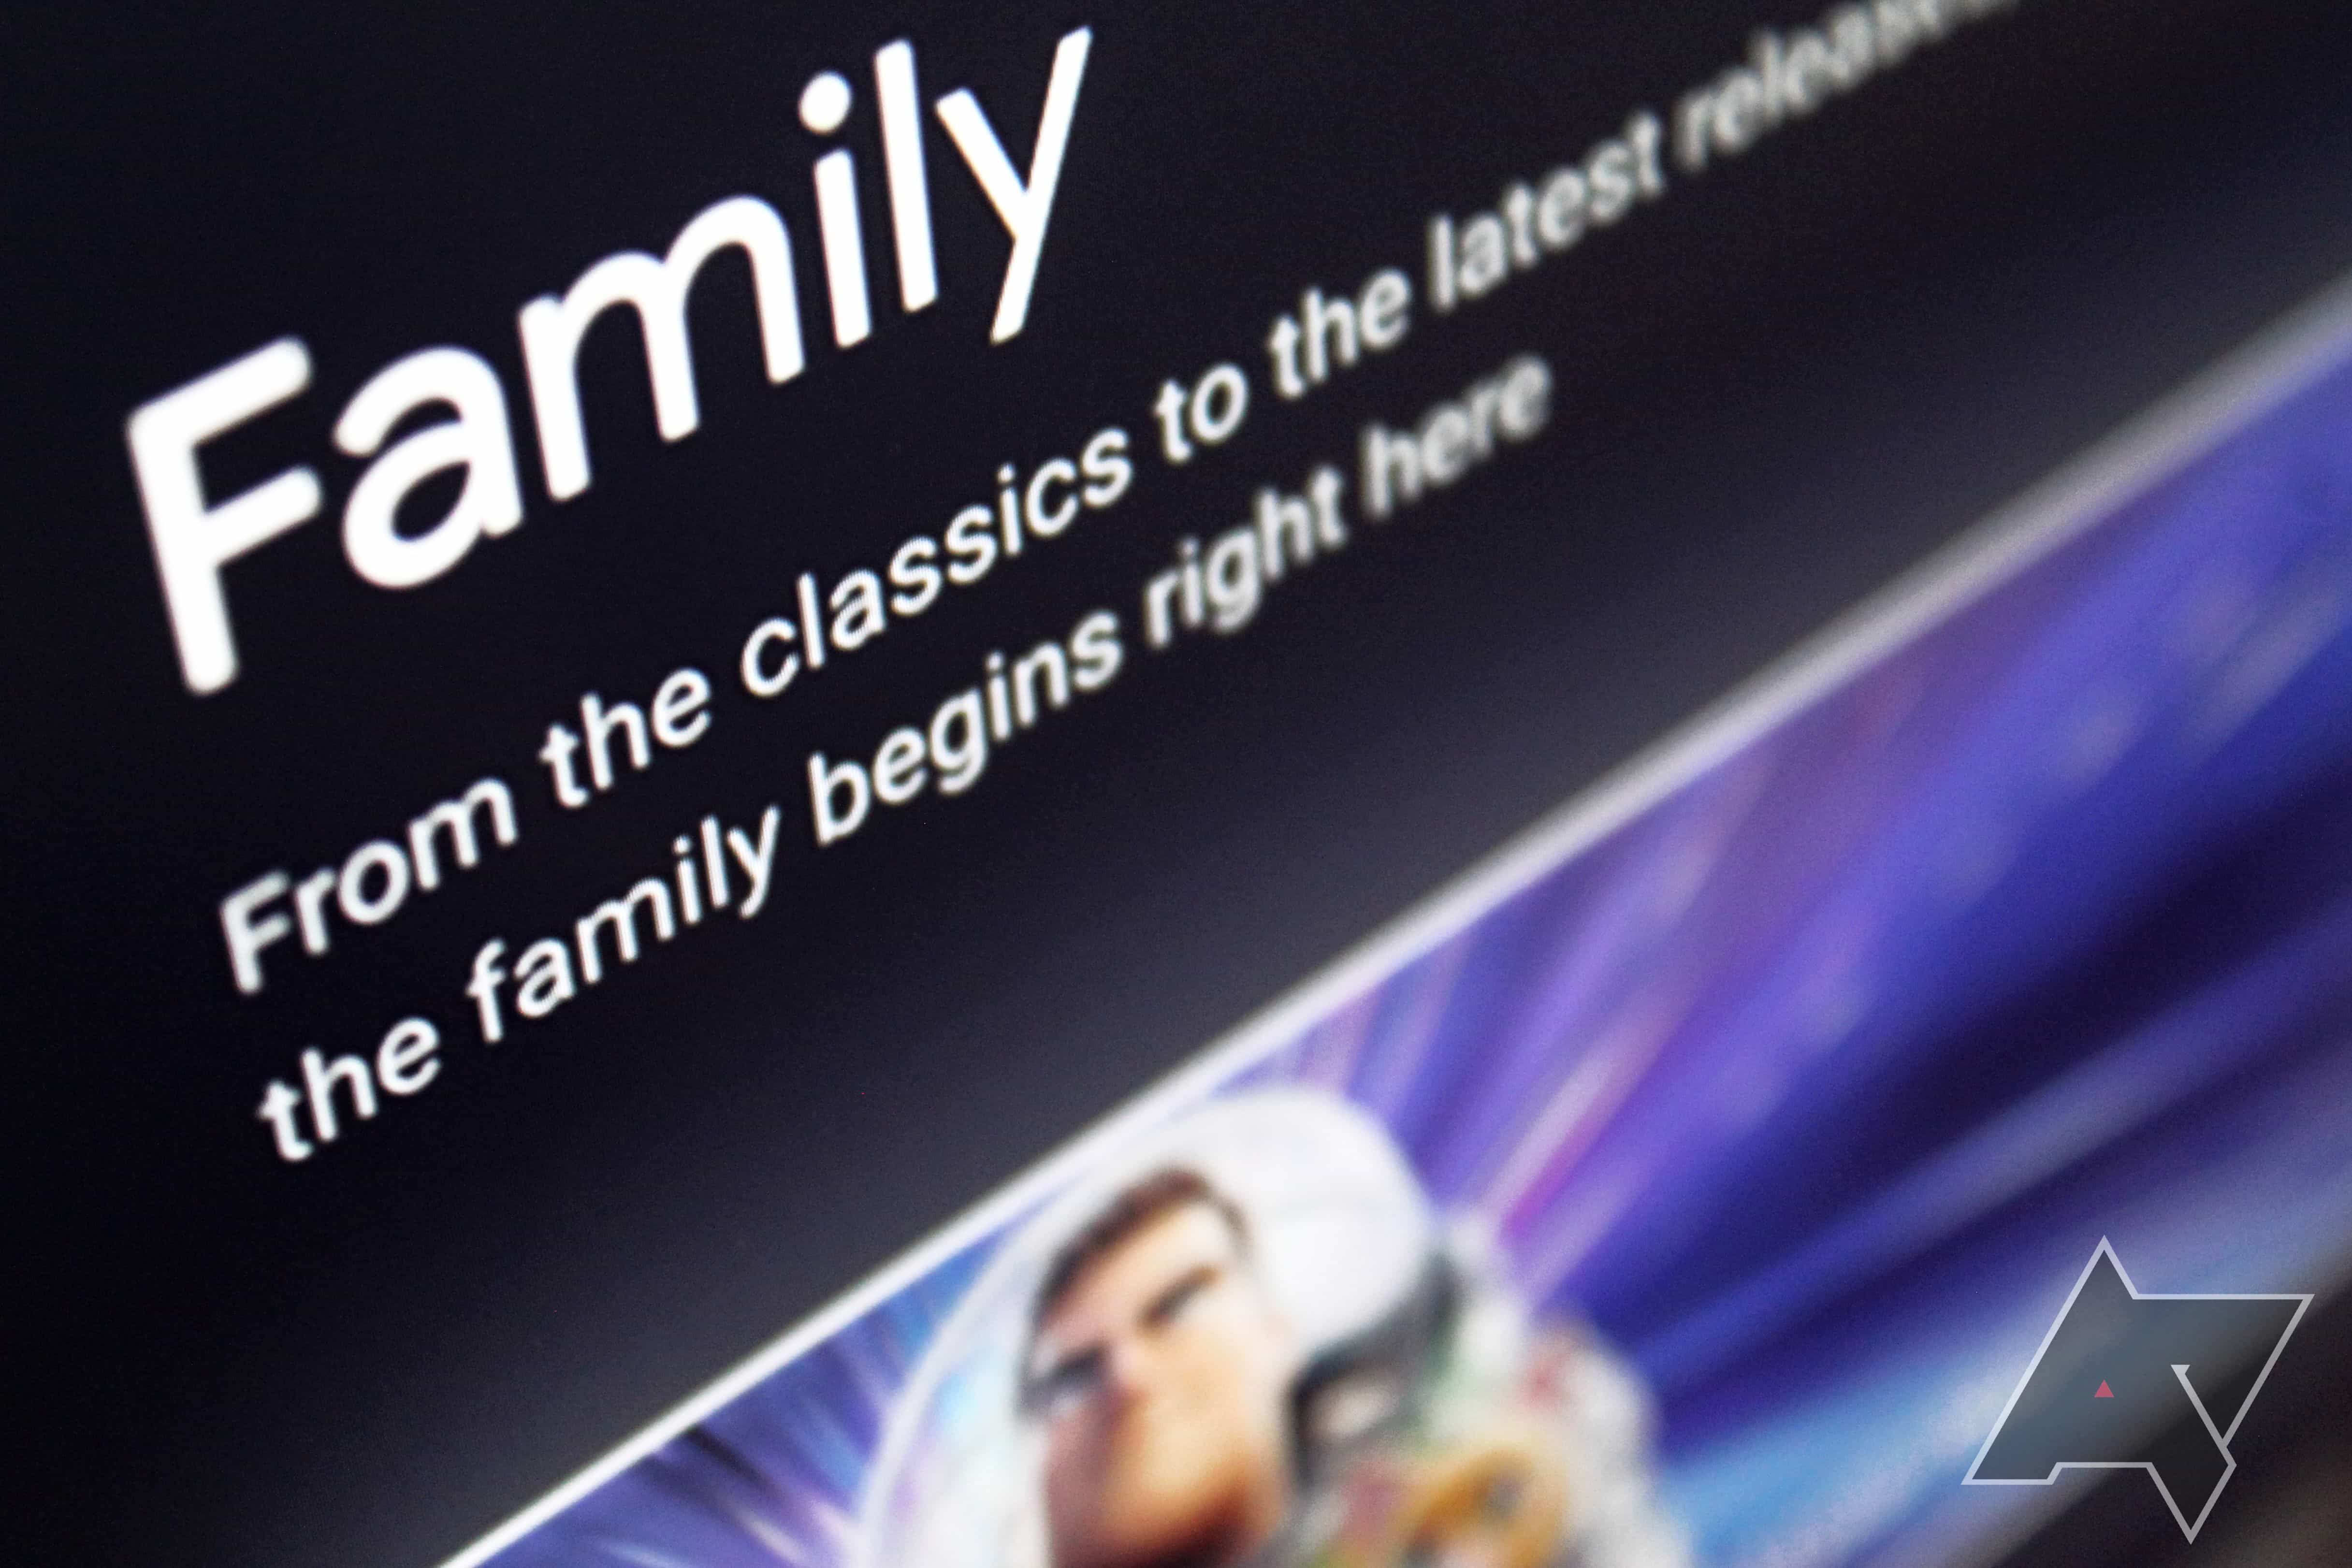 A zoomed in image of the Family section in Google TV